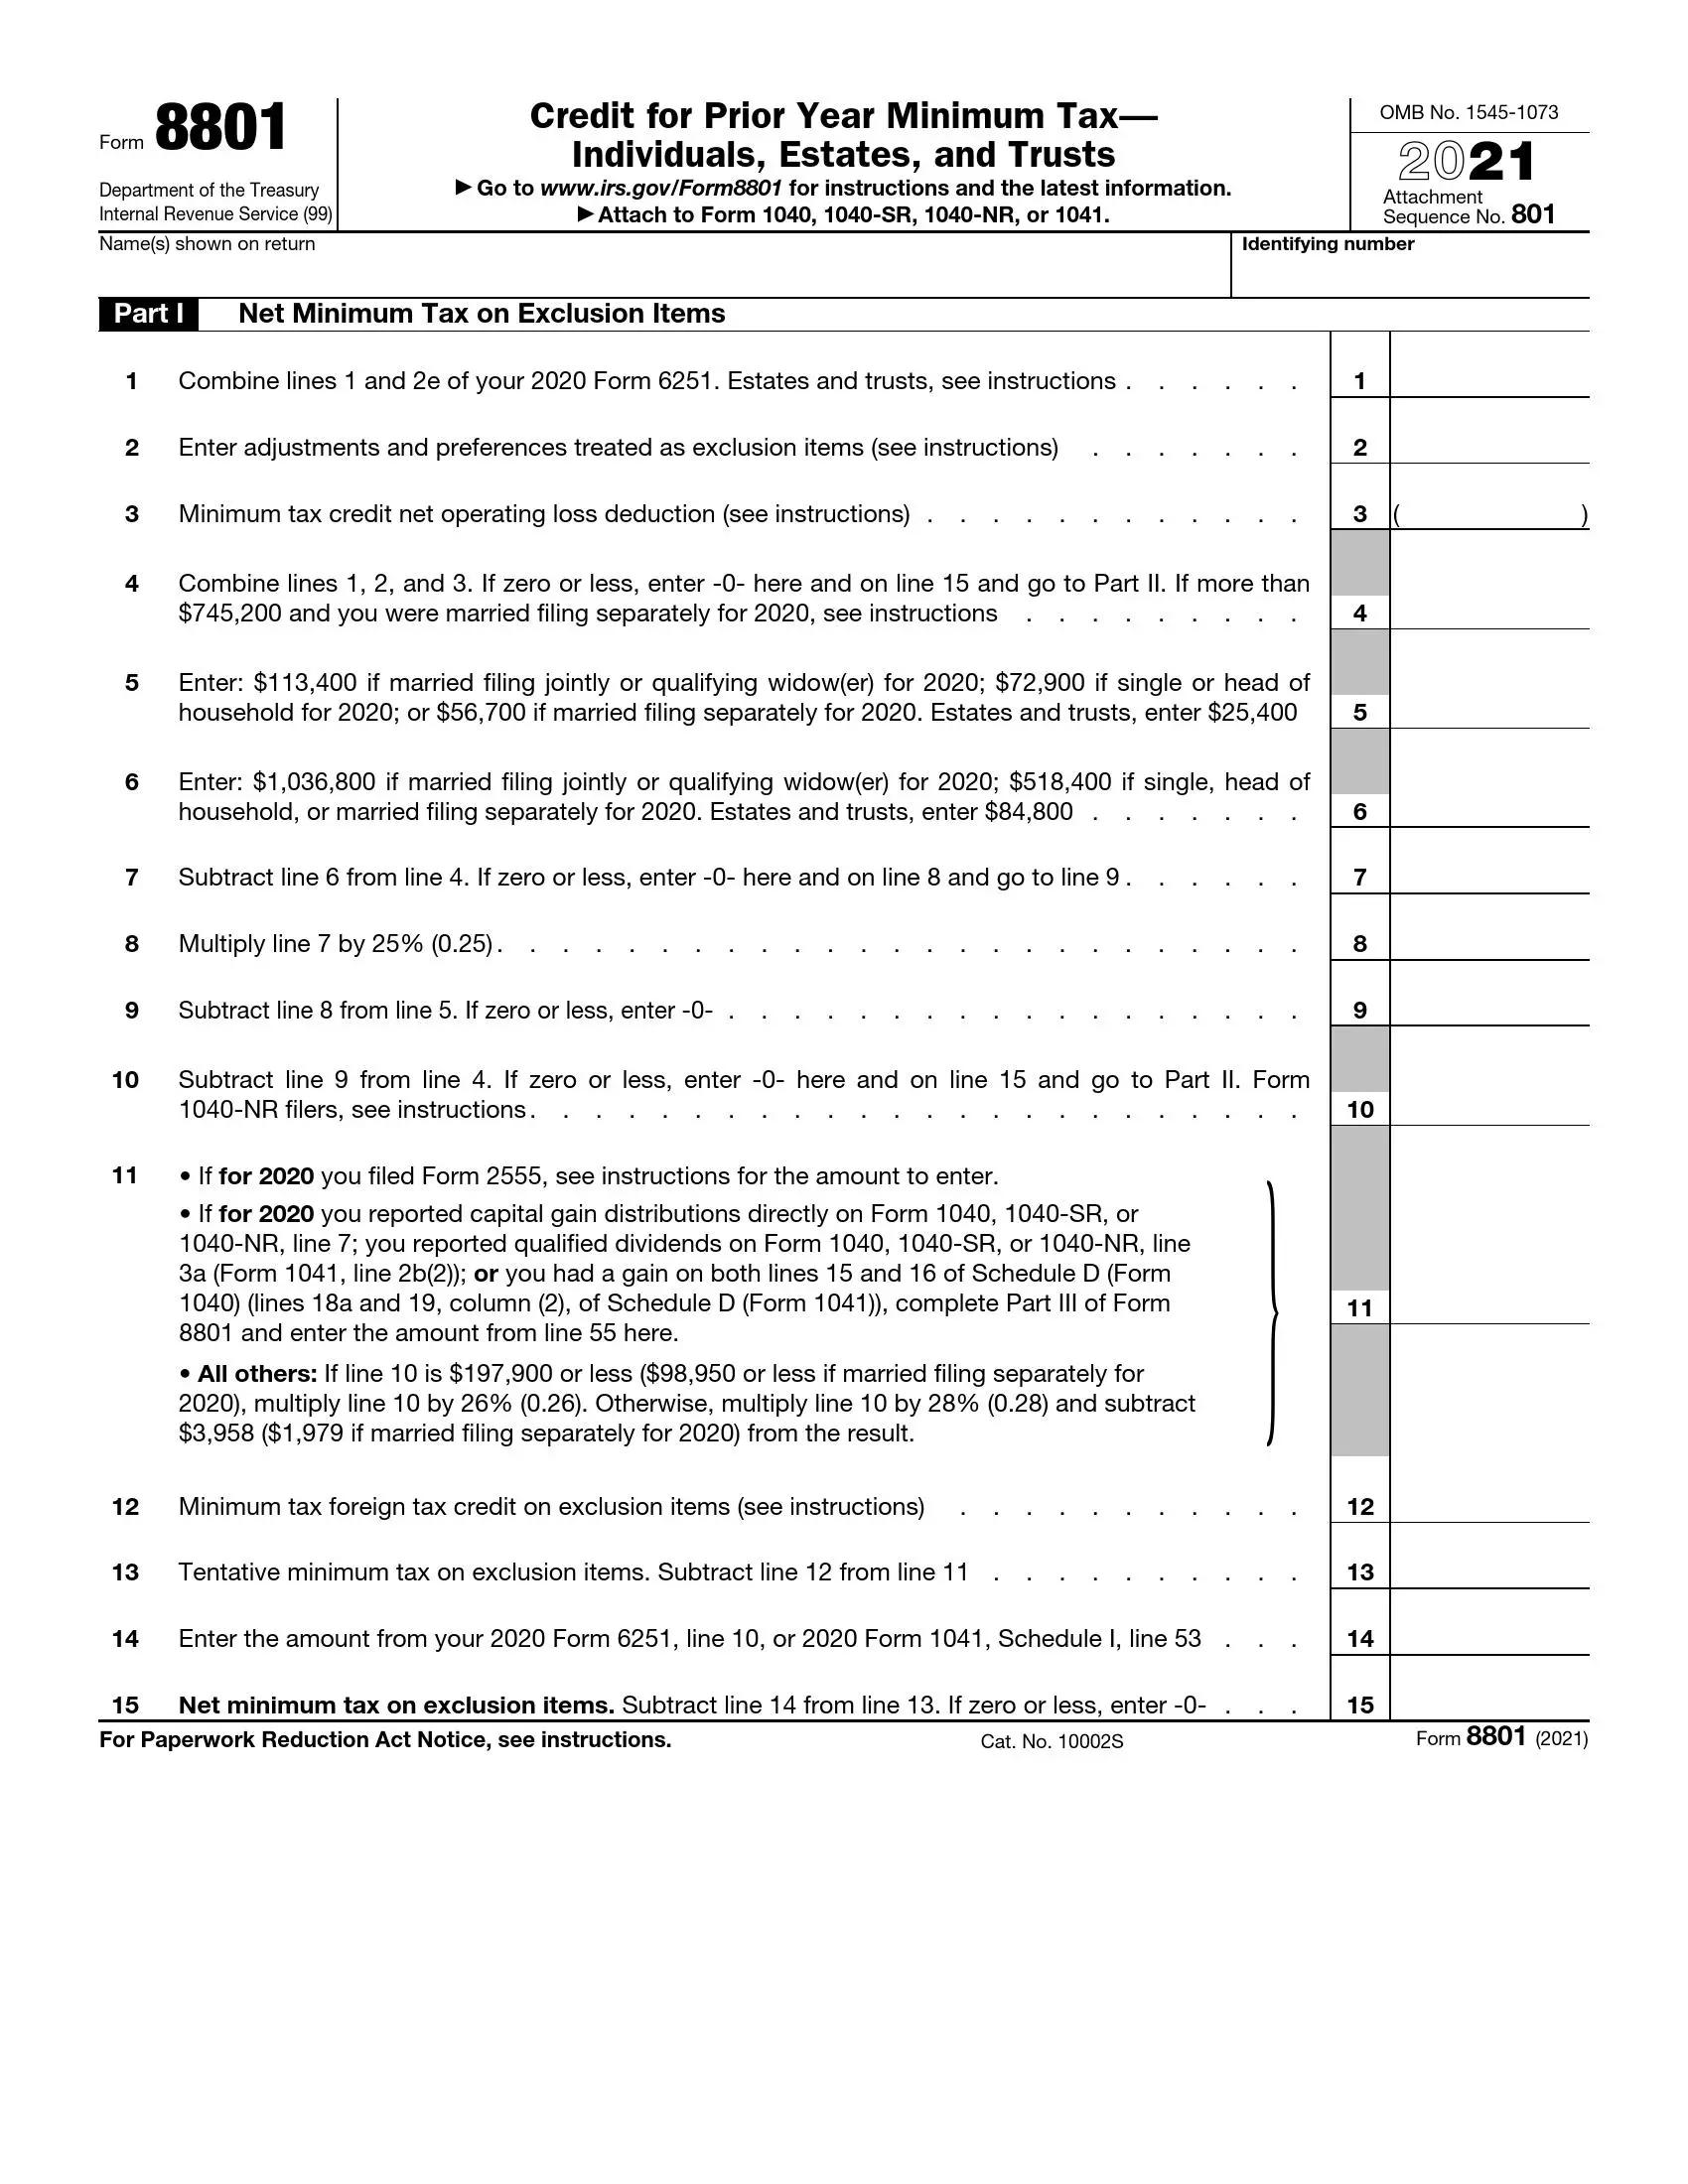 irs form 8801 2021 preview